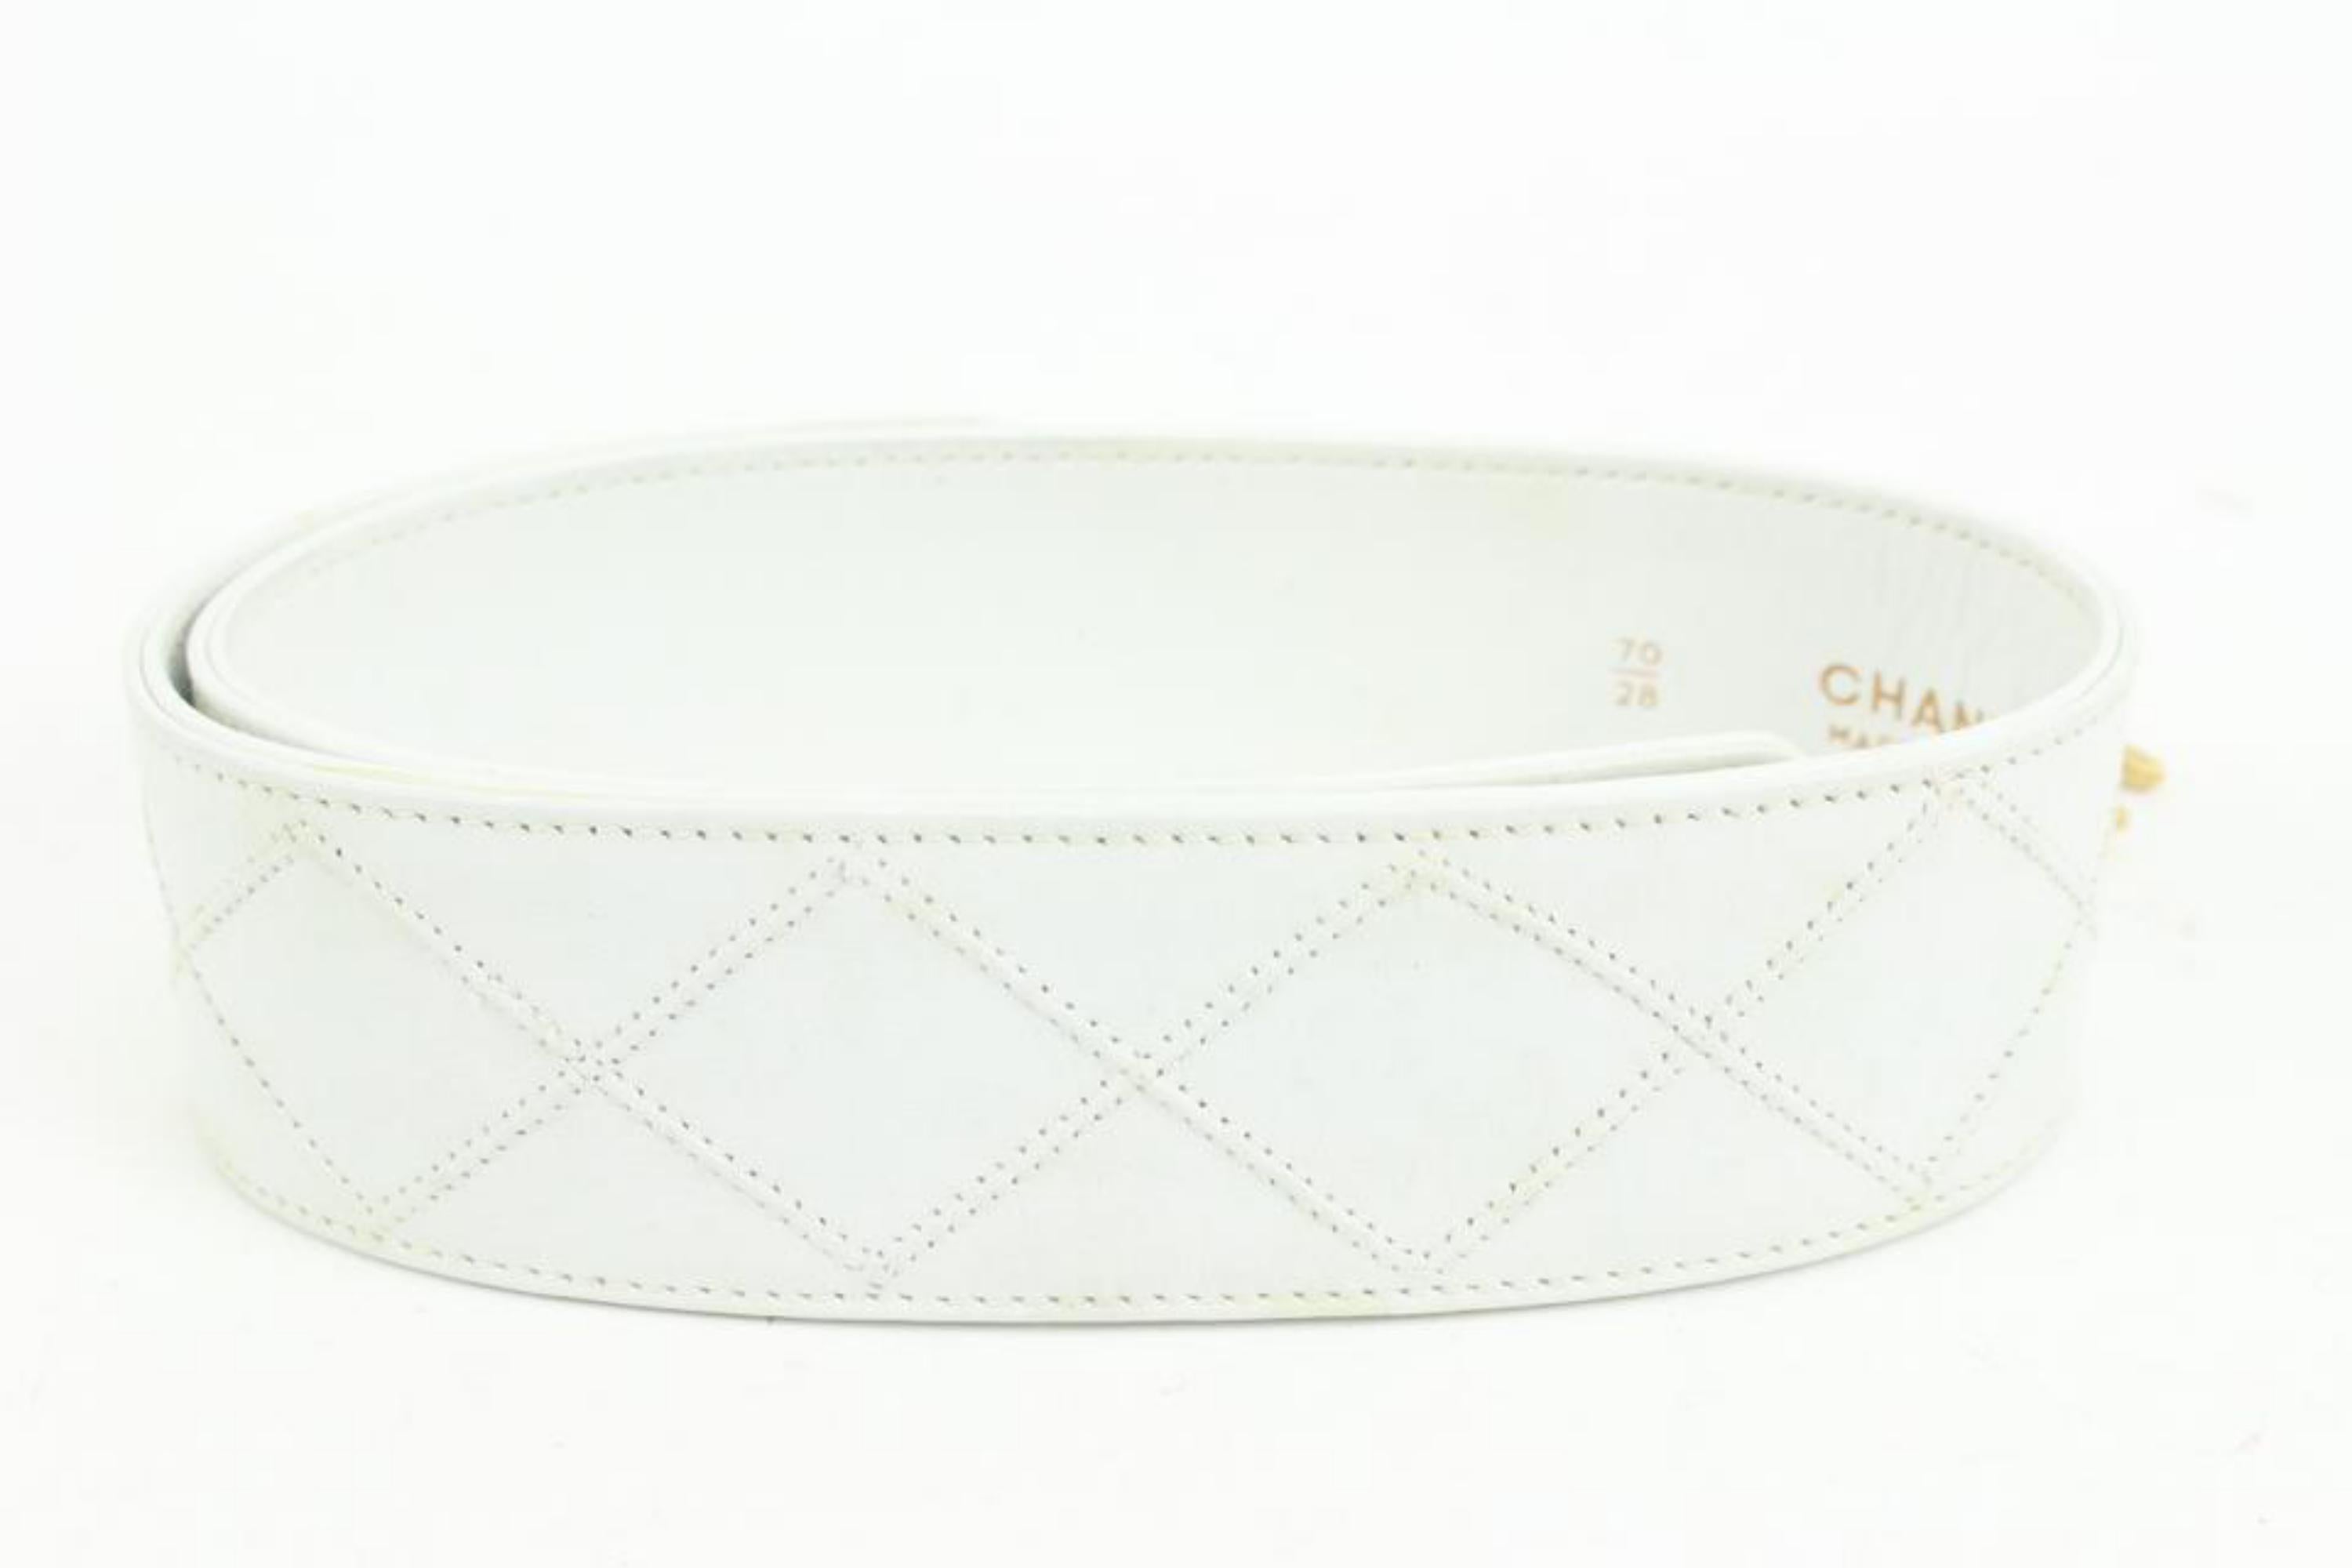 Chanel White Quilted Lambskin Belt with Gold CC Logo on Chain 41ck58 For Sale 4